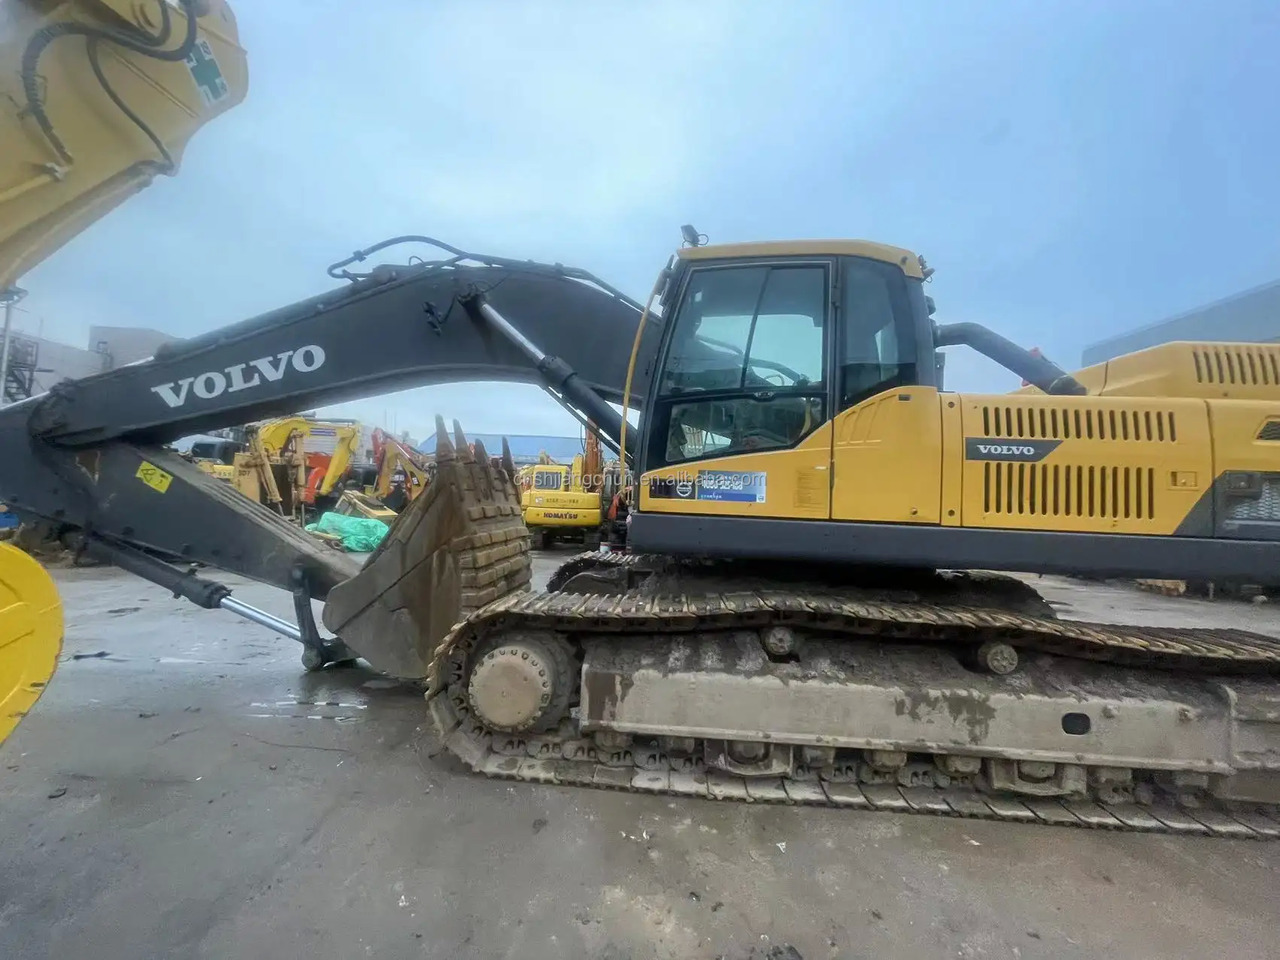 Bager goseničar New arrival second hand  hot selling Excavator construction machinery parts used excavator used  Volvo EC480D  in stock for sale: slika 3